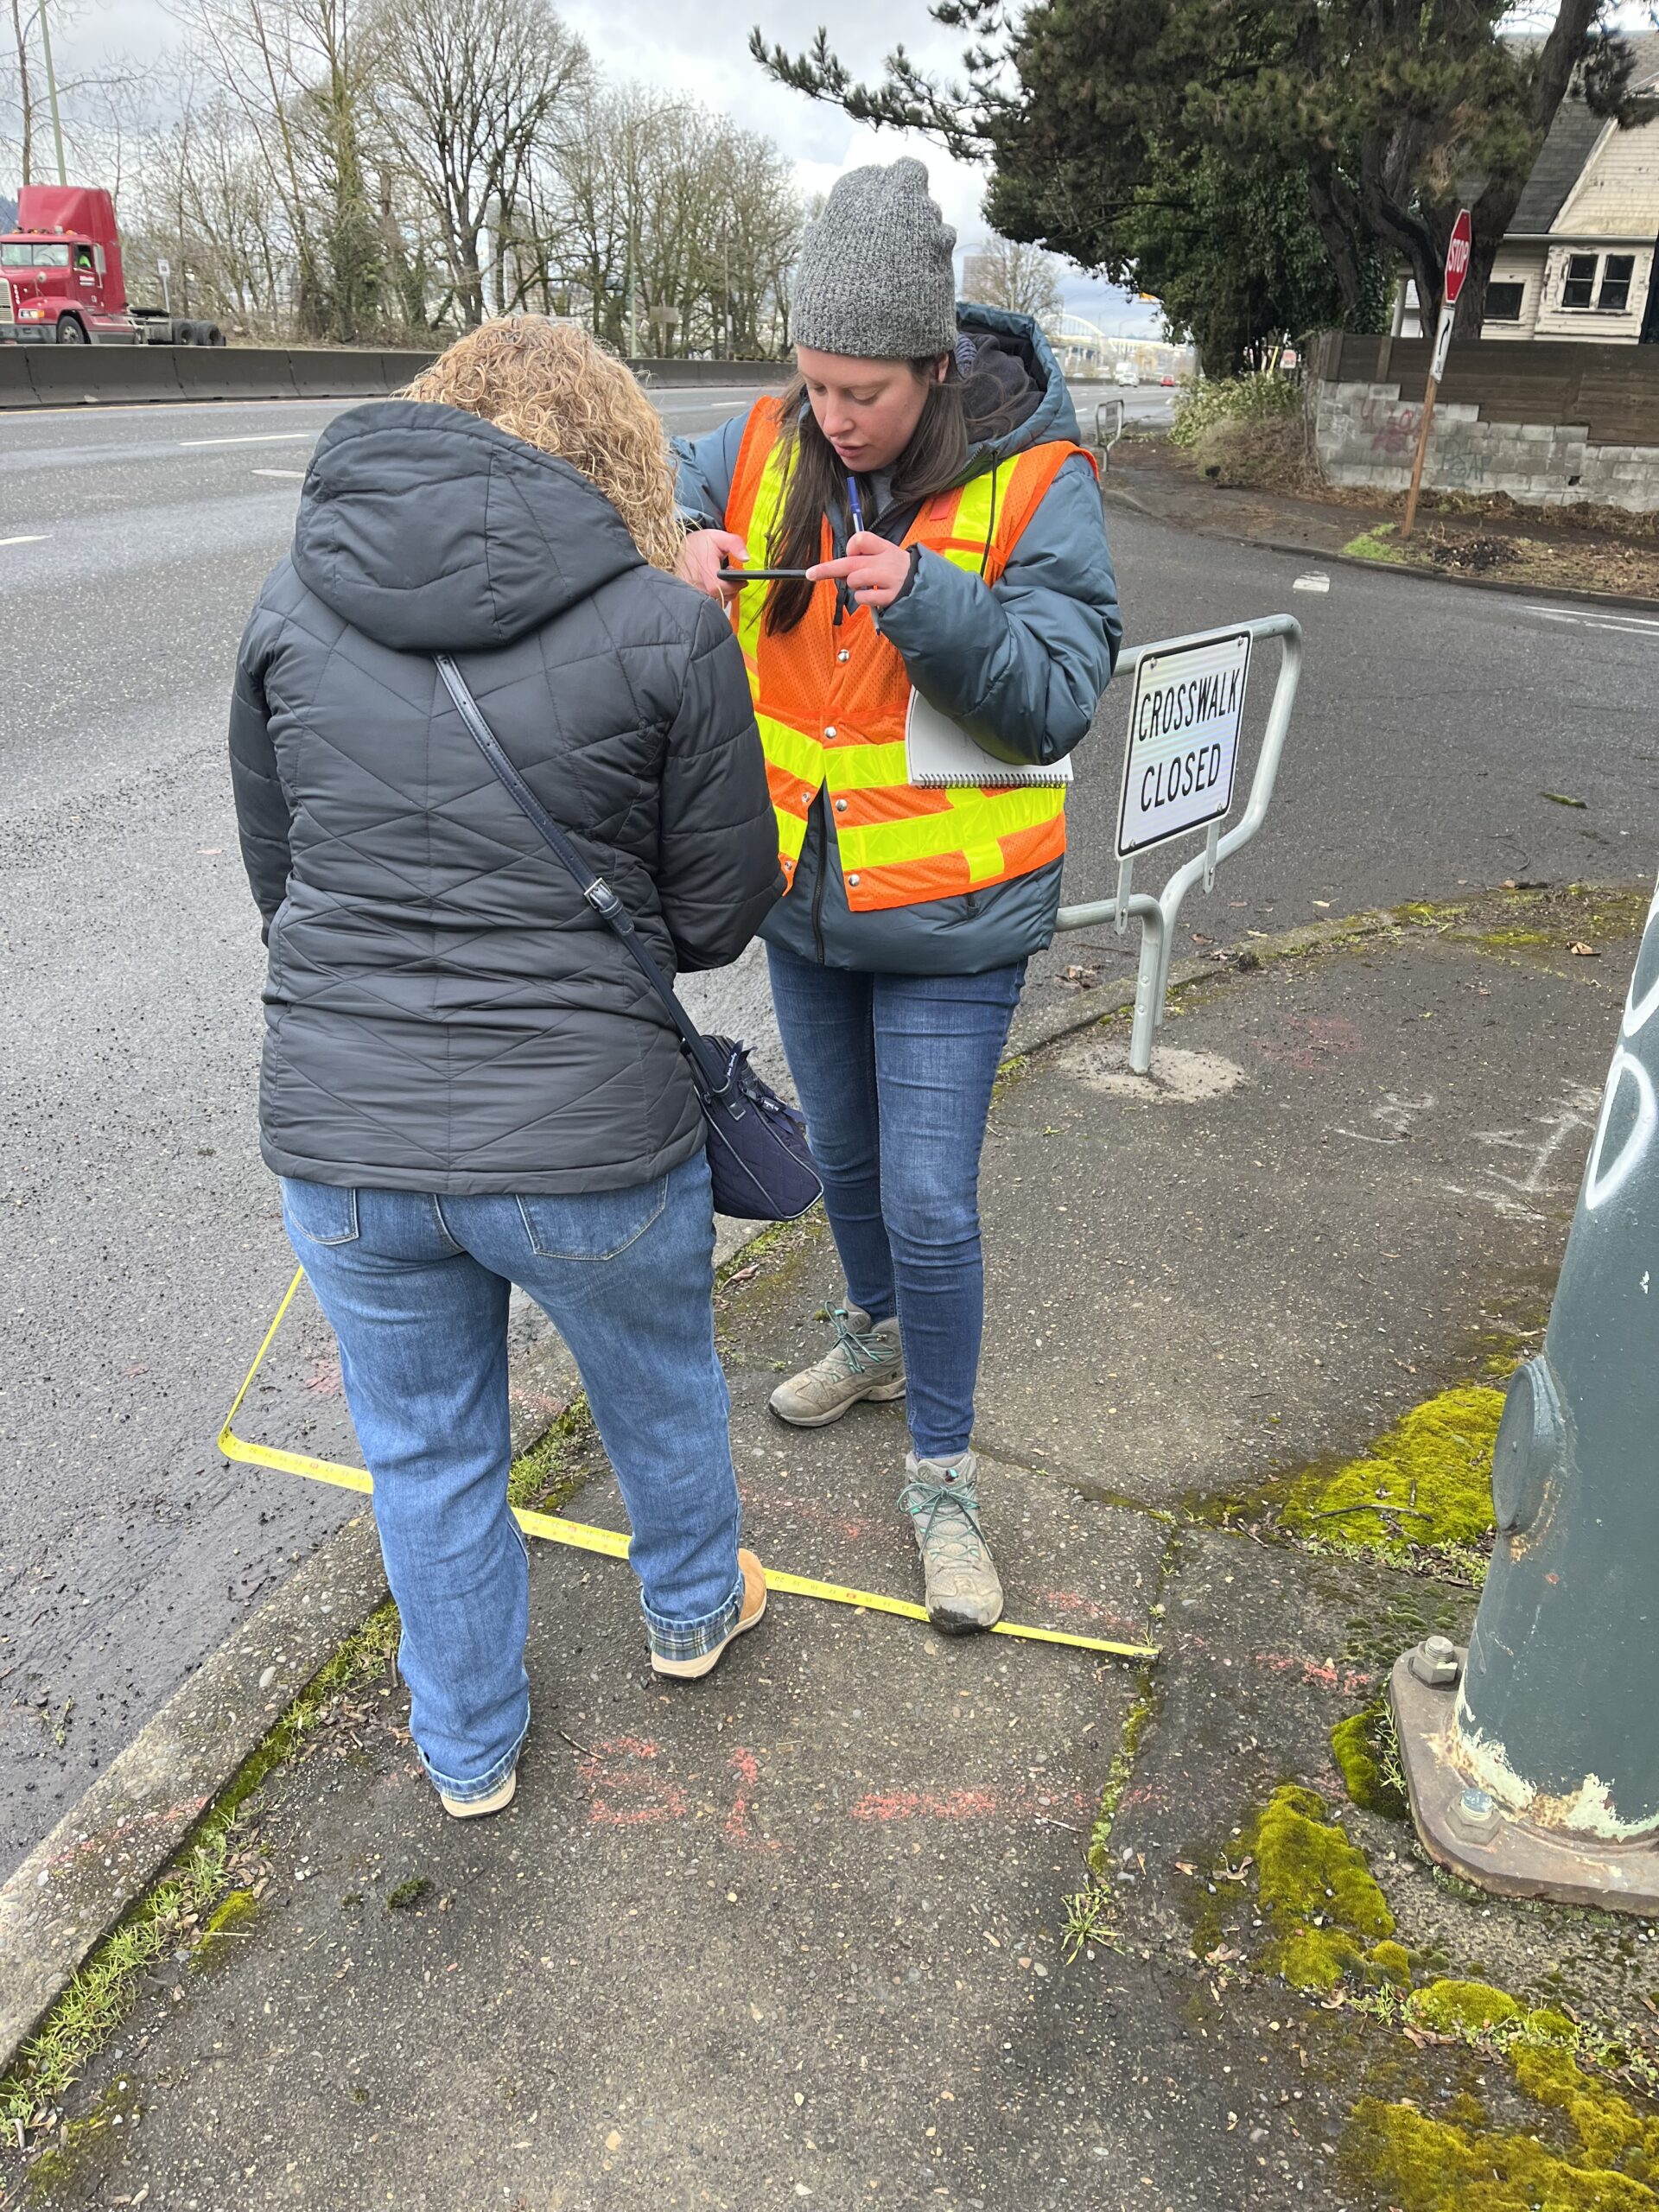 Two individuals take accessibility measurements on a sidewalk